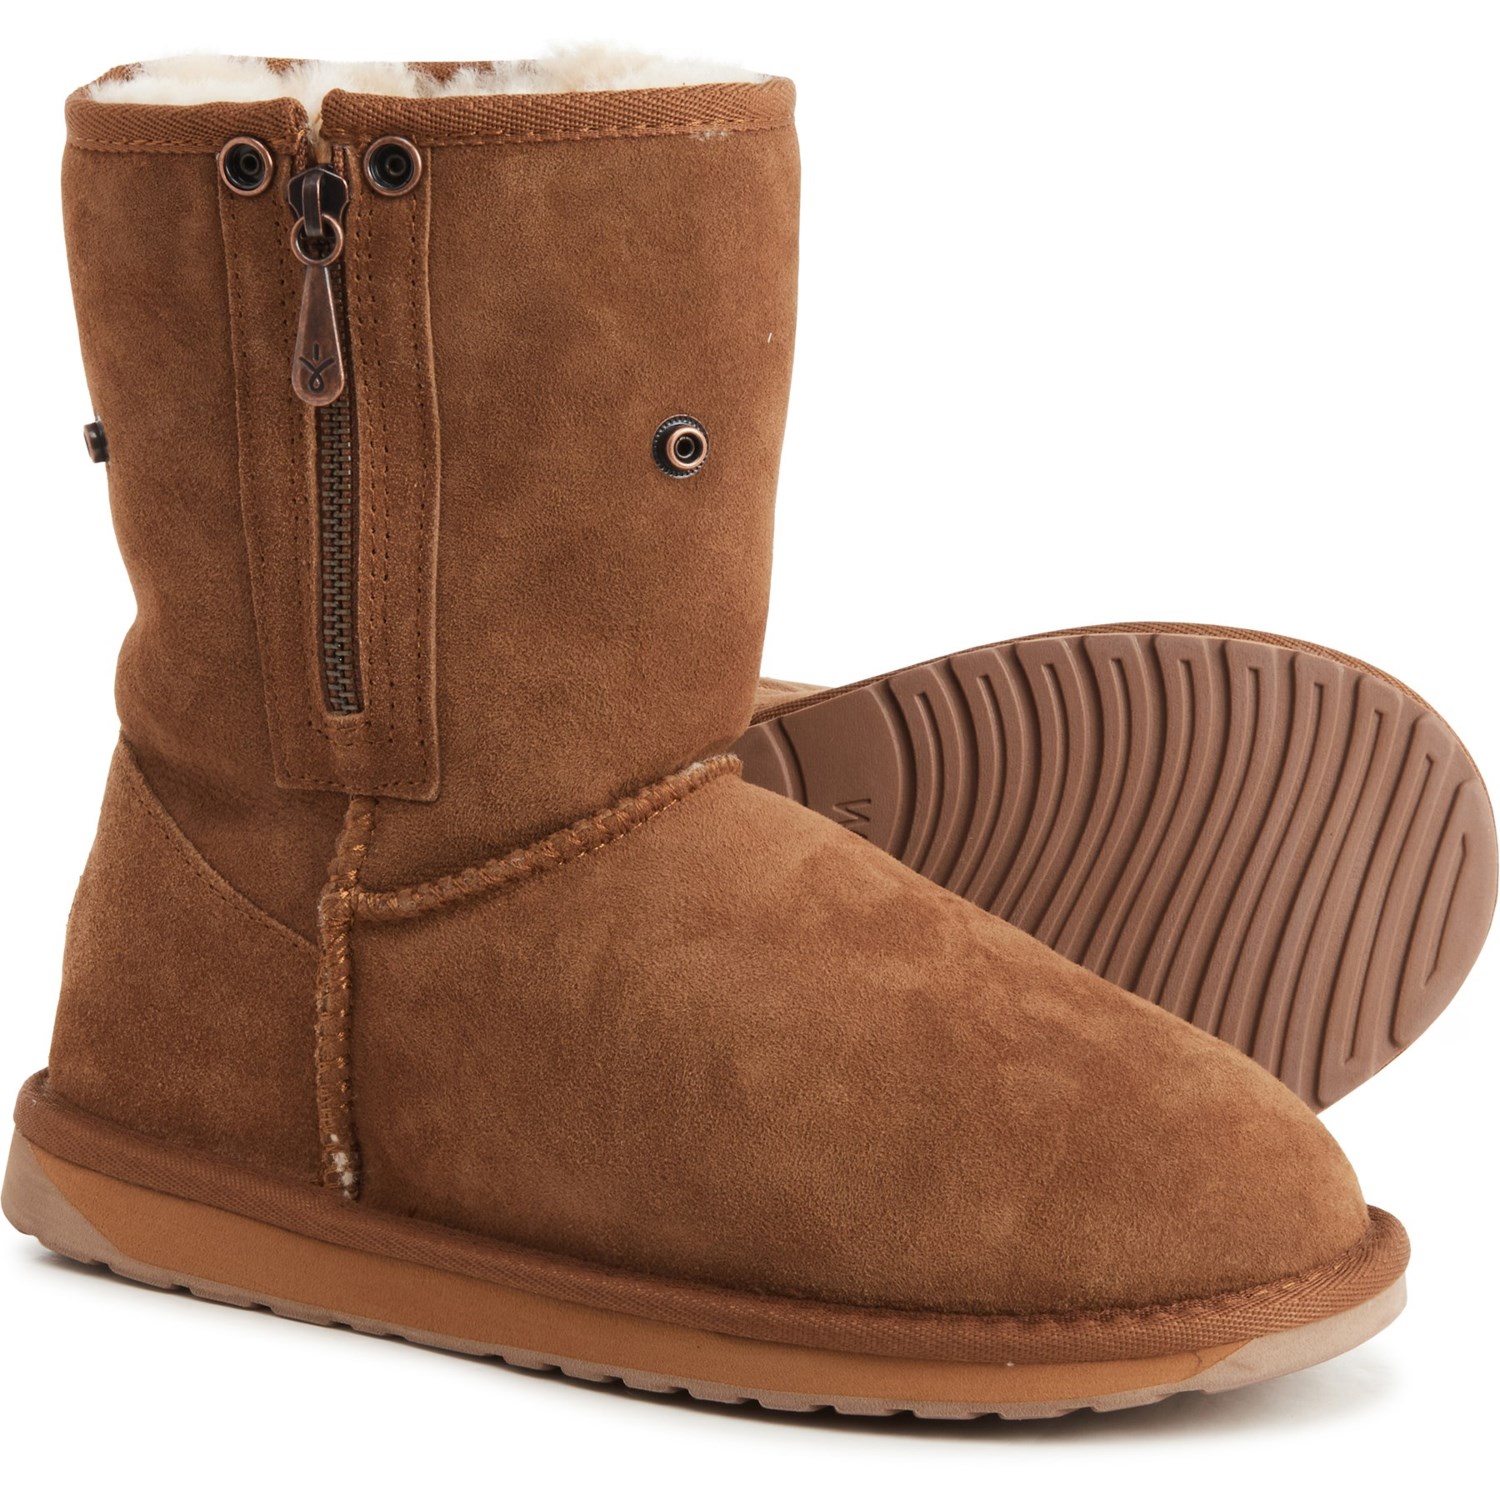 EMU Australia Stinger Lo Zip Boots $64 On Clearance At Sierra! (Normally $140)